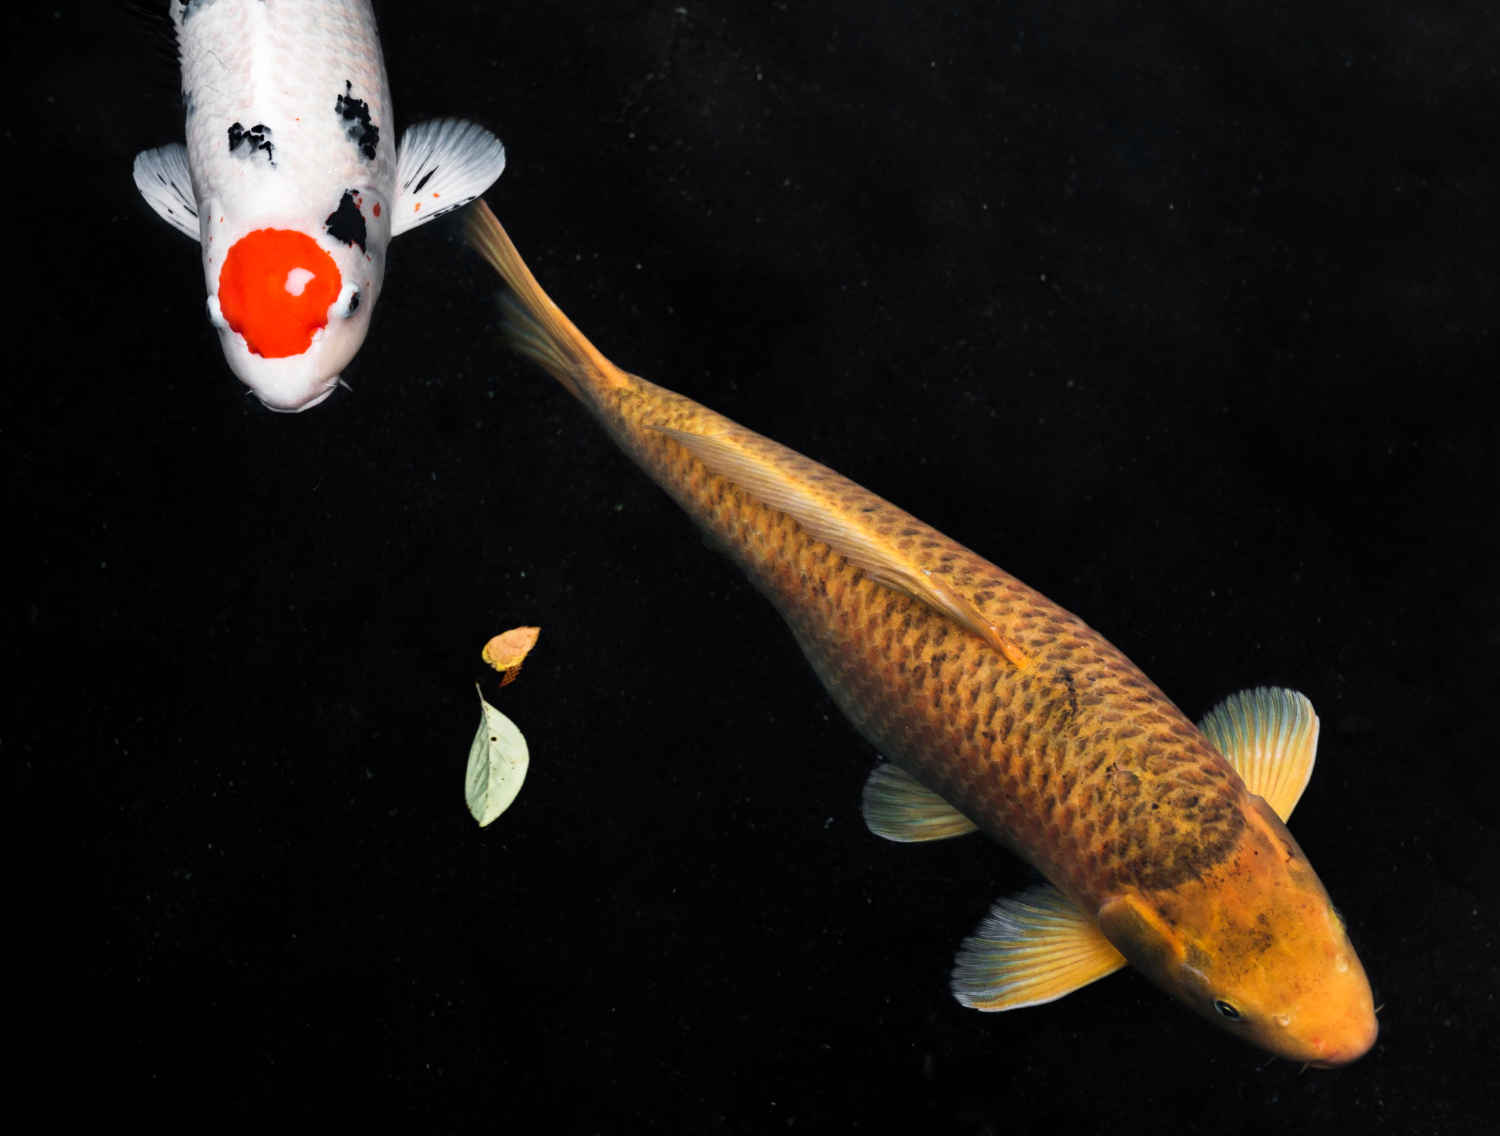 Can fish feel emotions?